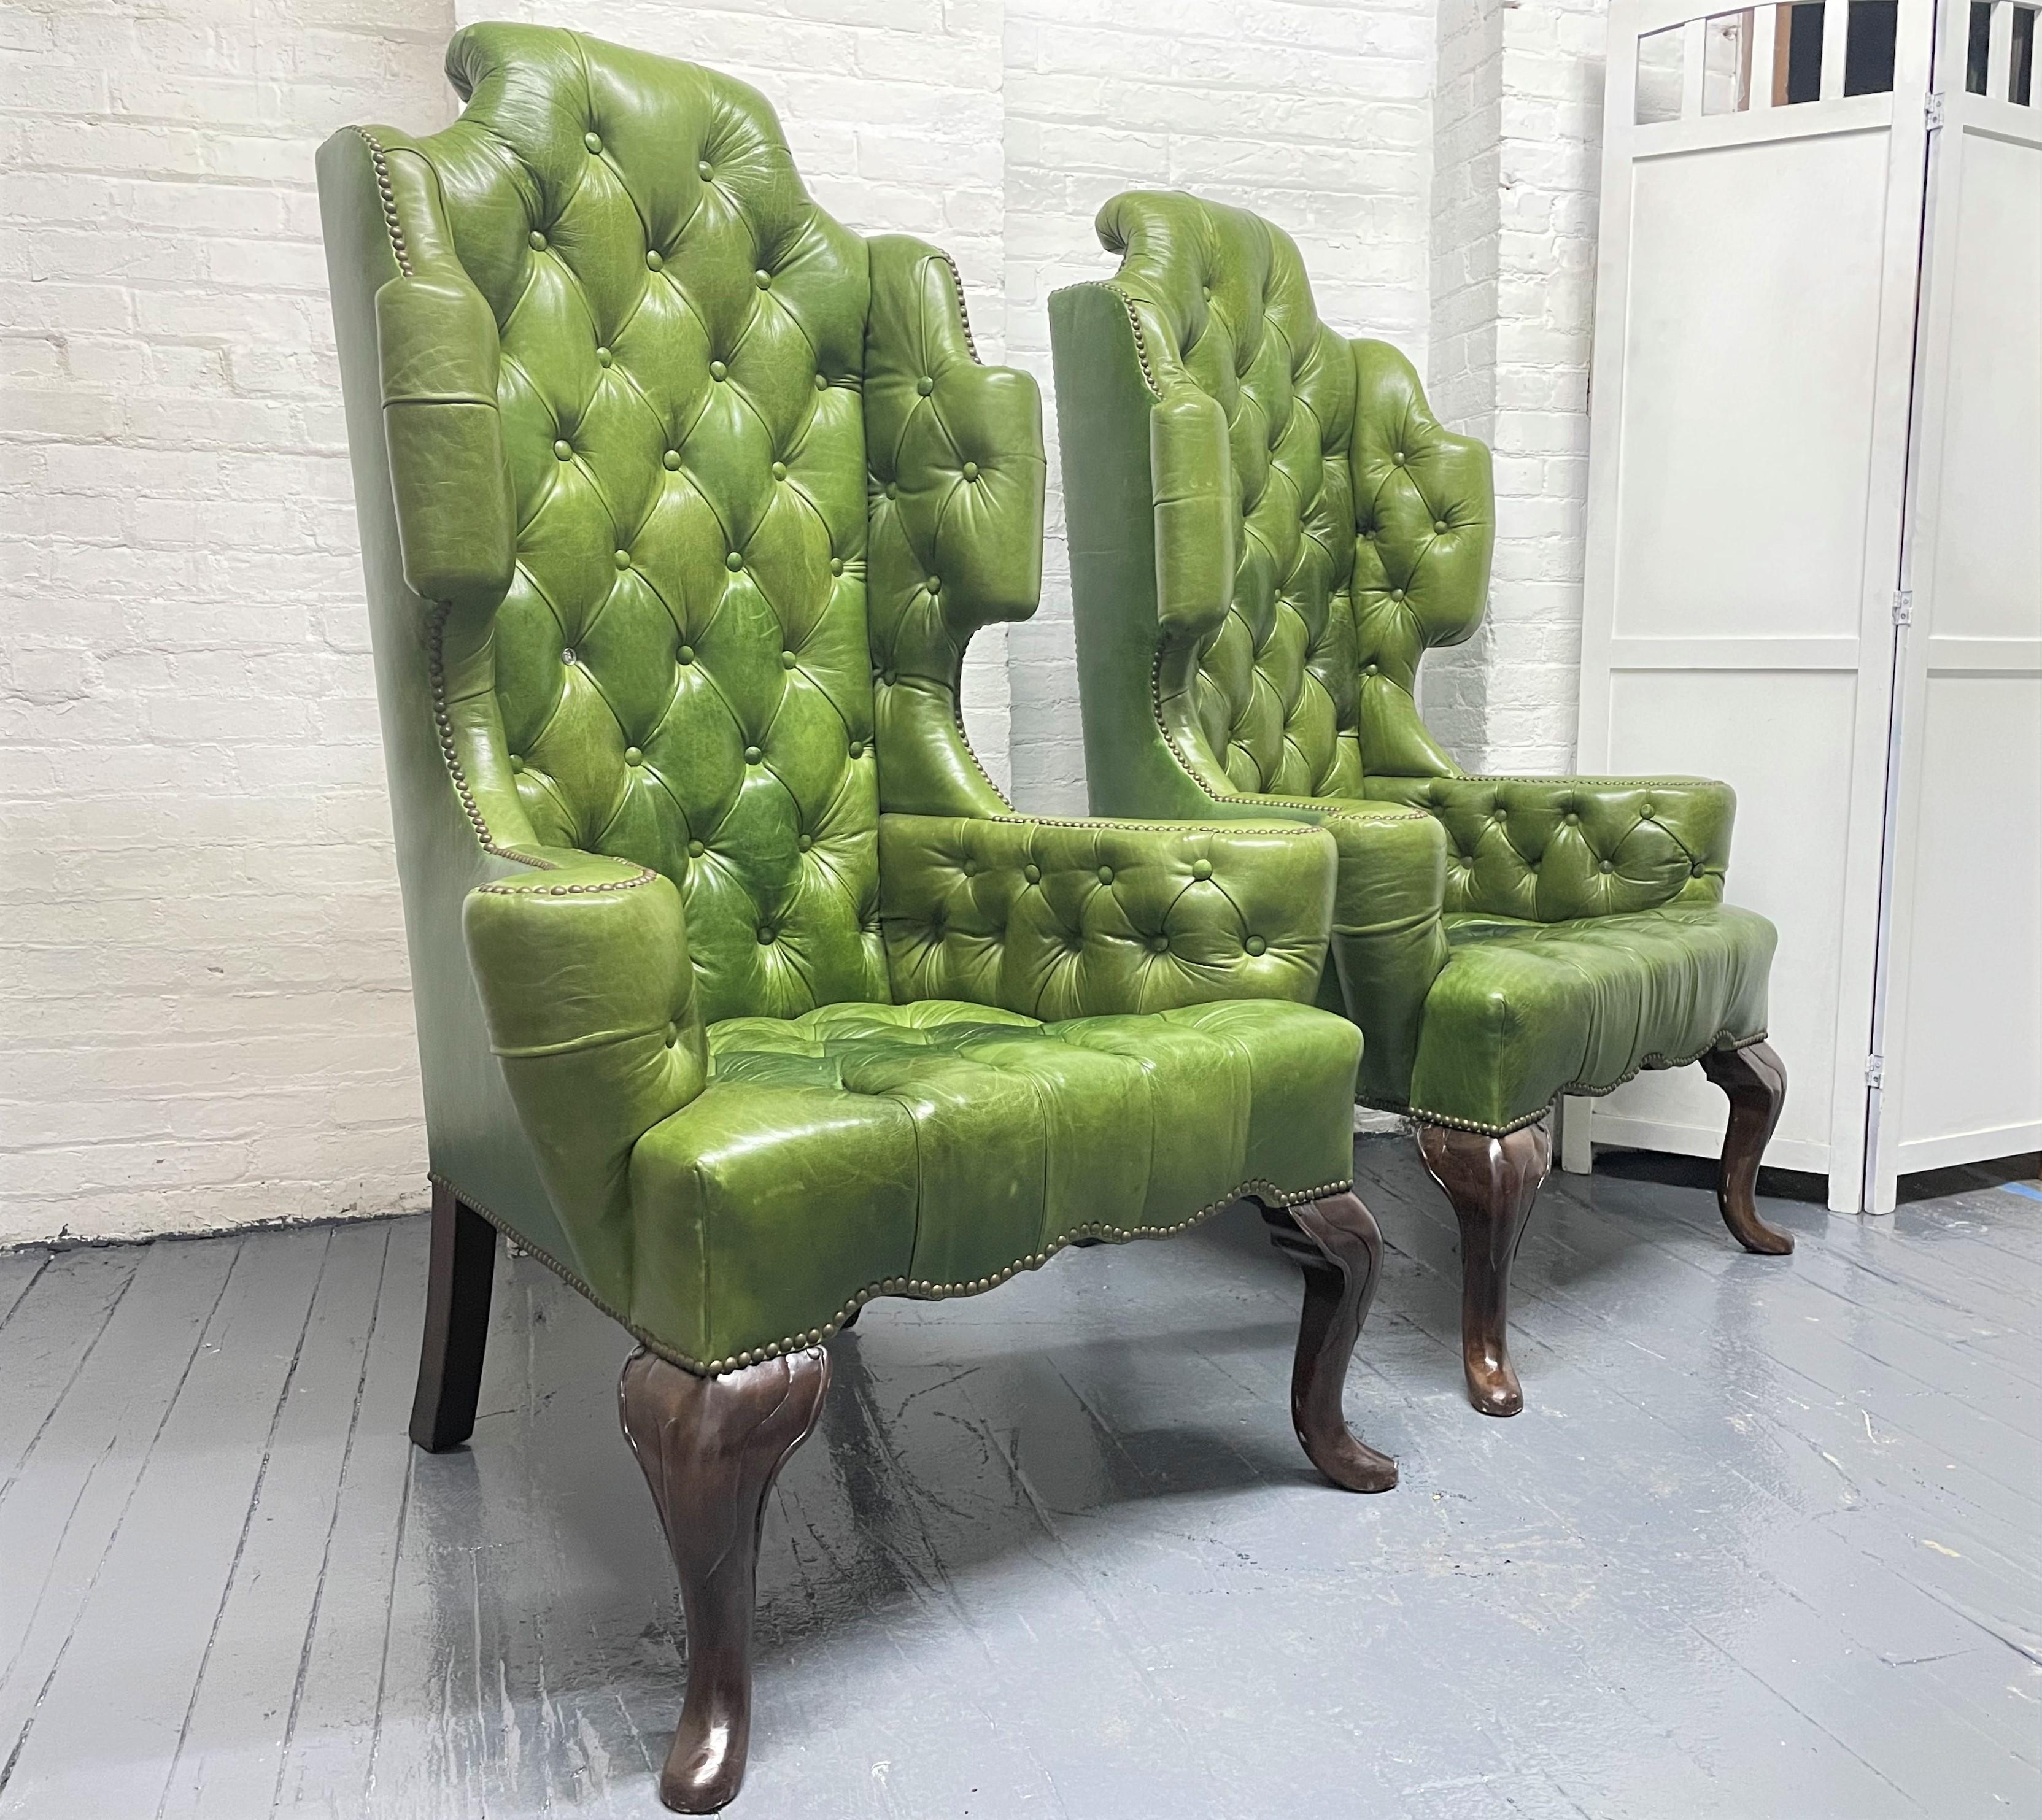 Pair antique style tufted leather wingback chairs. The chairs have Queen Anne style wood legs, nicely tufted with soft leather.